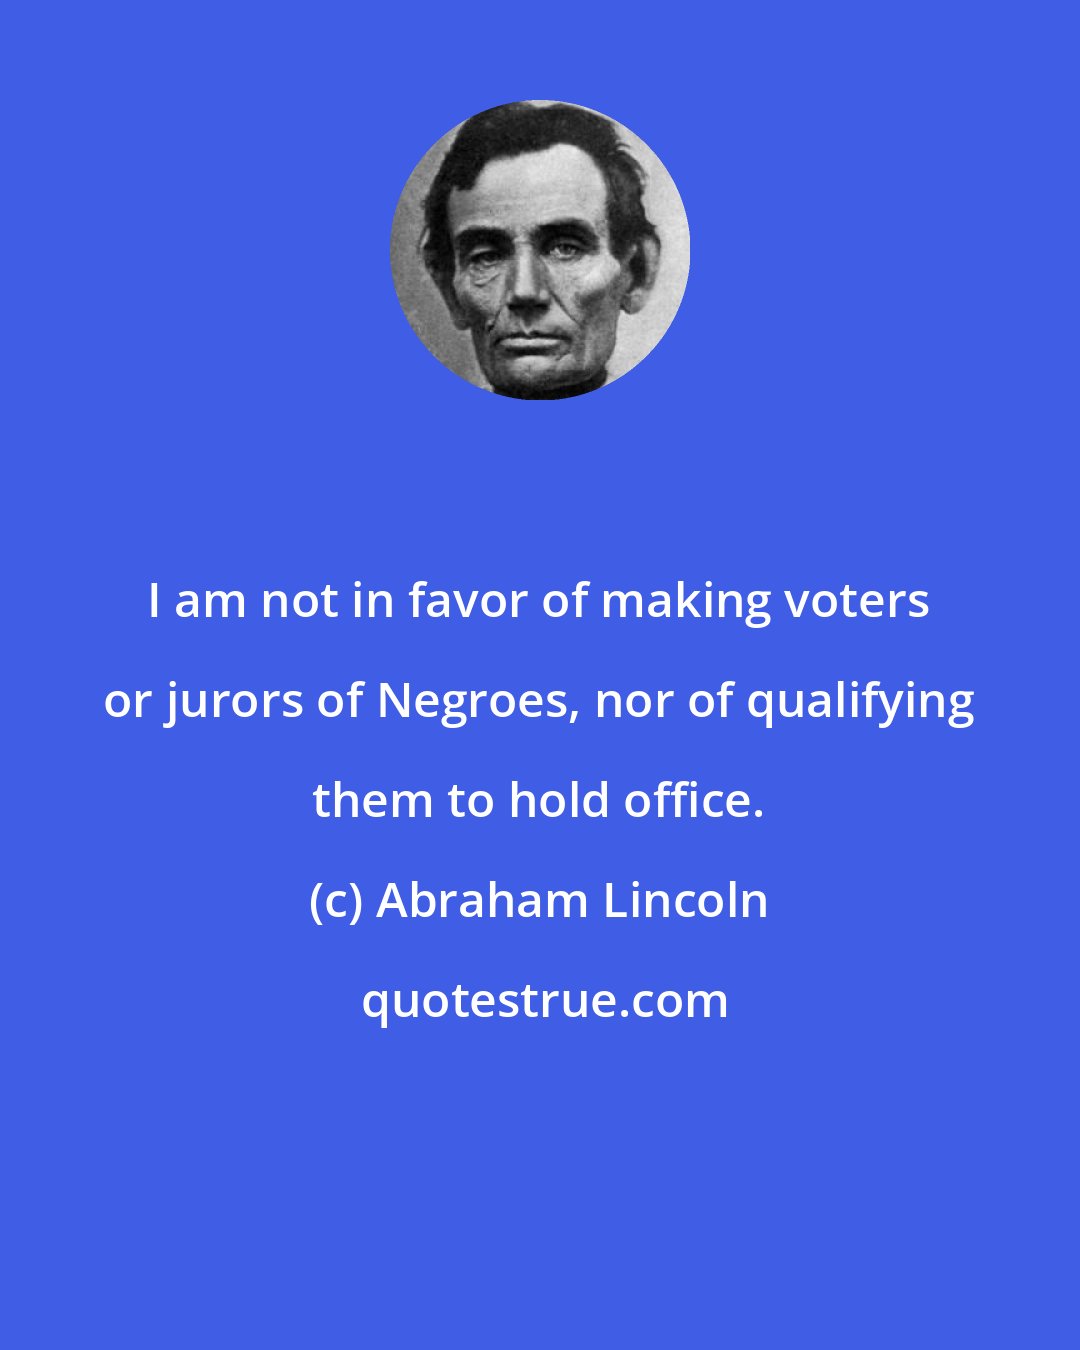 Abraham Lincoln: I am not in favor of making voters or jurors of Negroes, nor of qualifying them to hold office.